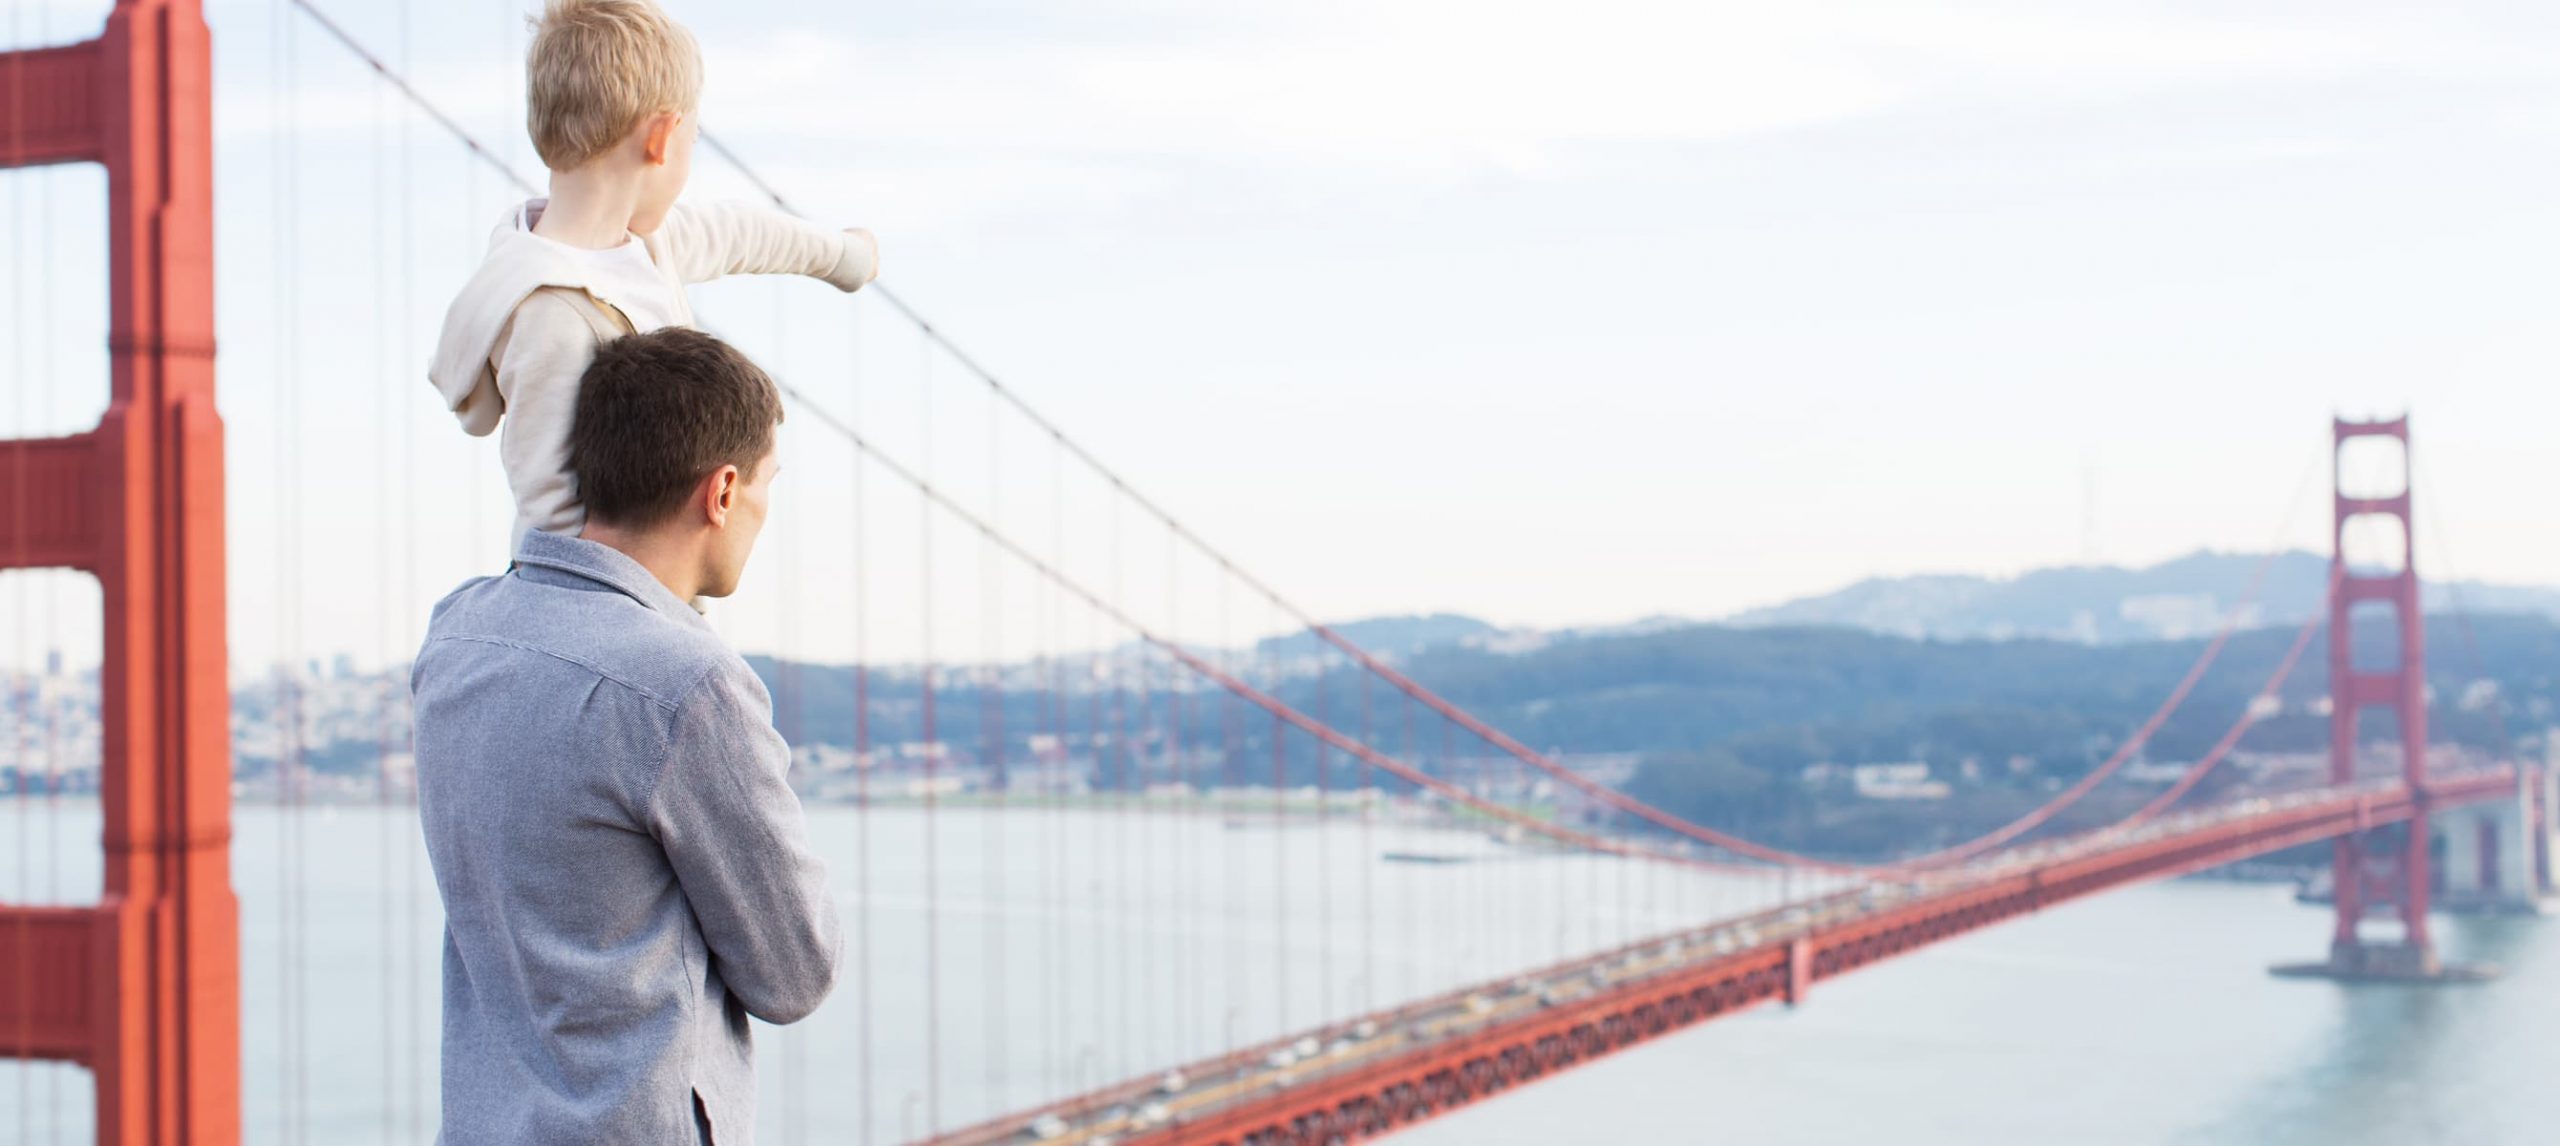 Father with his son marveling at the Golden Gate Bridge in San Francisco, California.